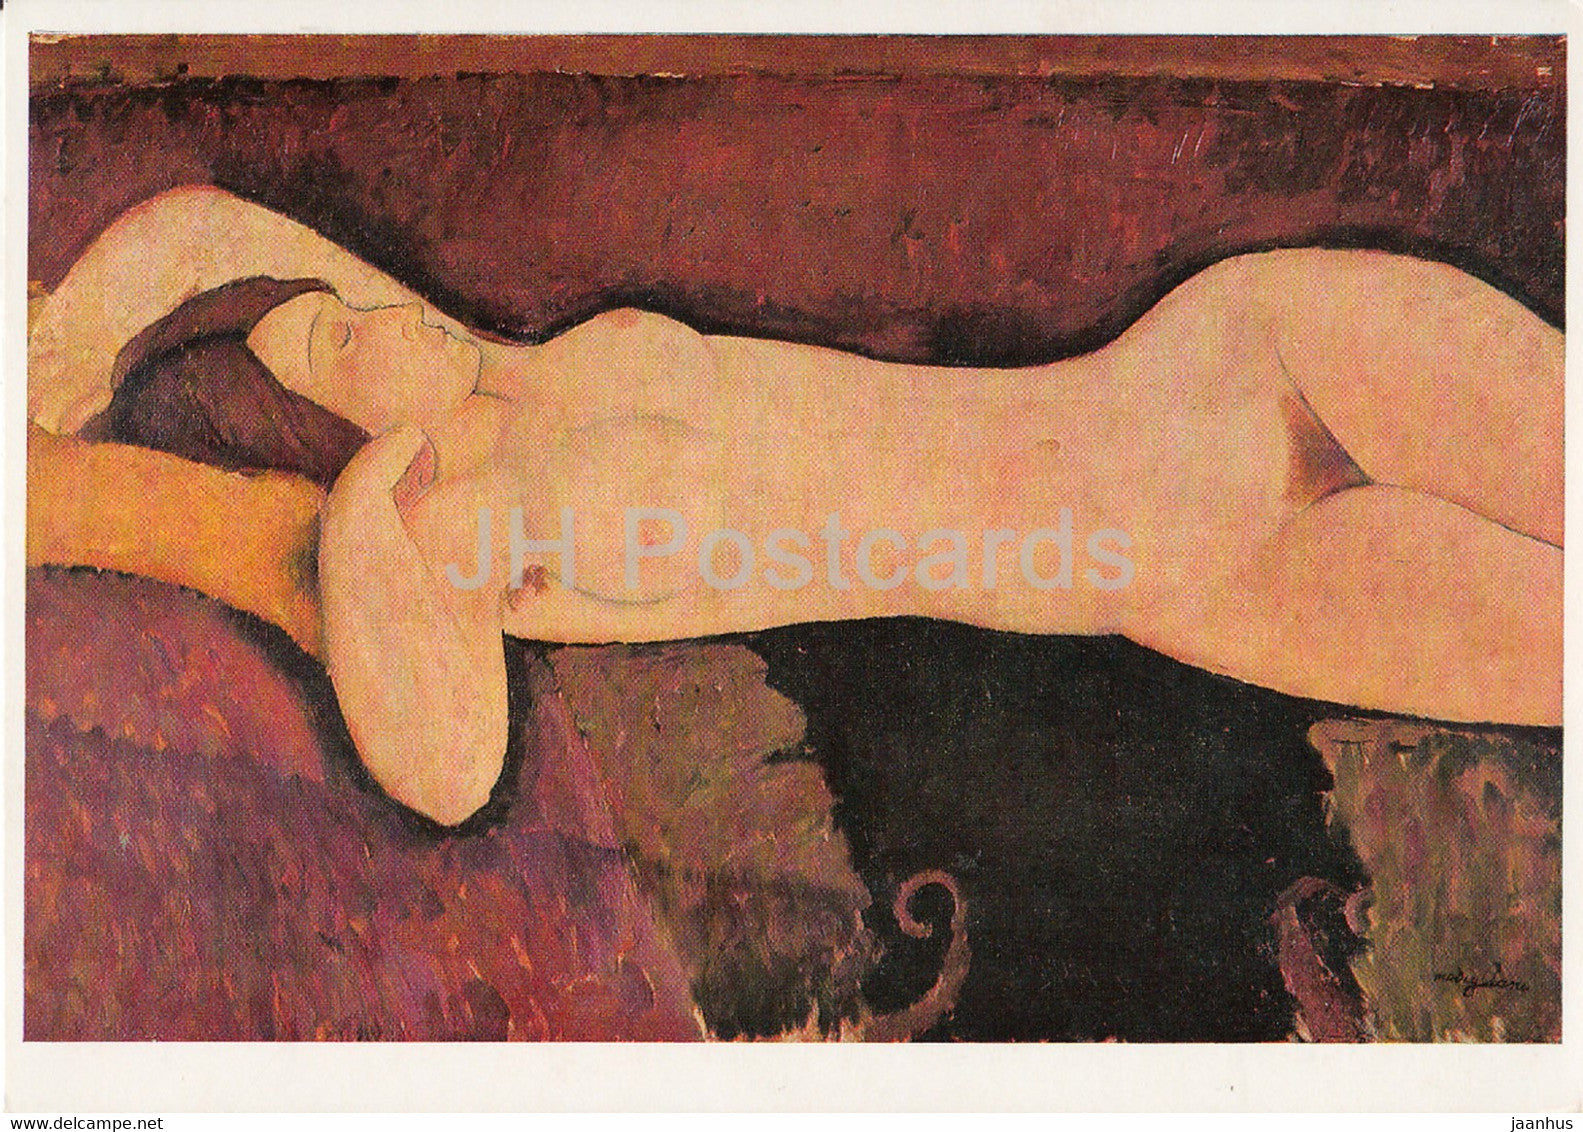 painting by Amadeo Modigliani - Liegende - naked woman - nude - Italian art - Germany DDR - unused - JH Postcards